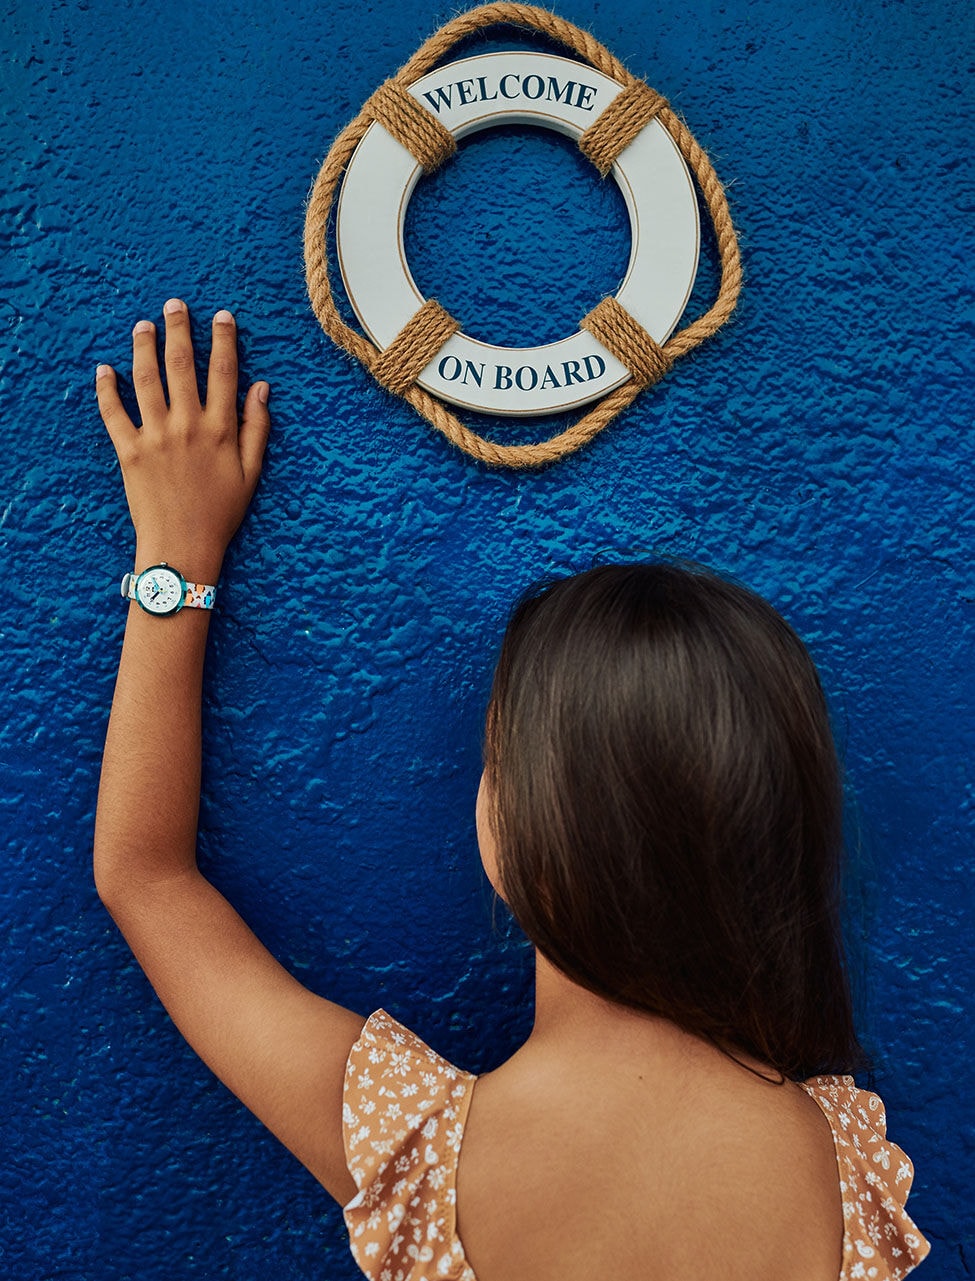 Kid wearing a watch from the collection Sea Treasure